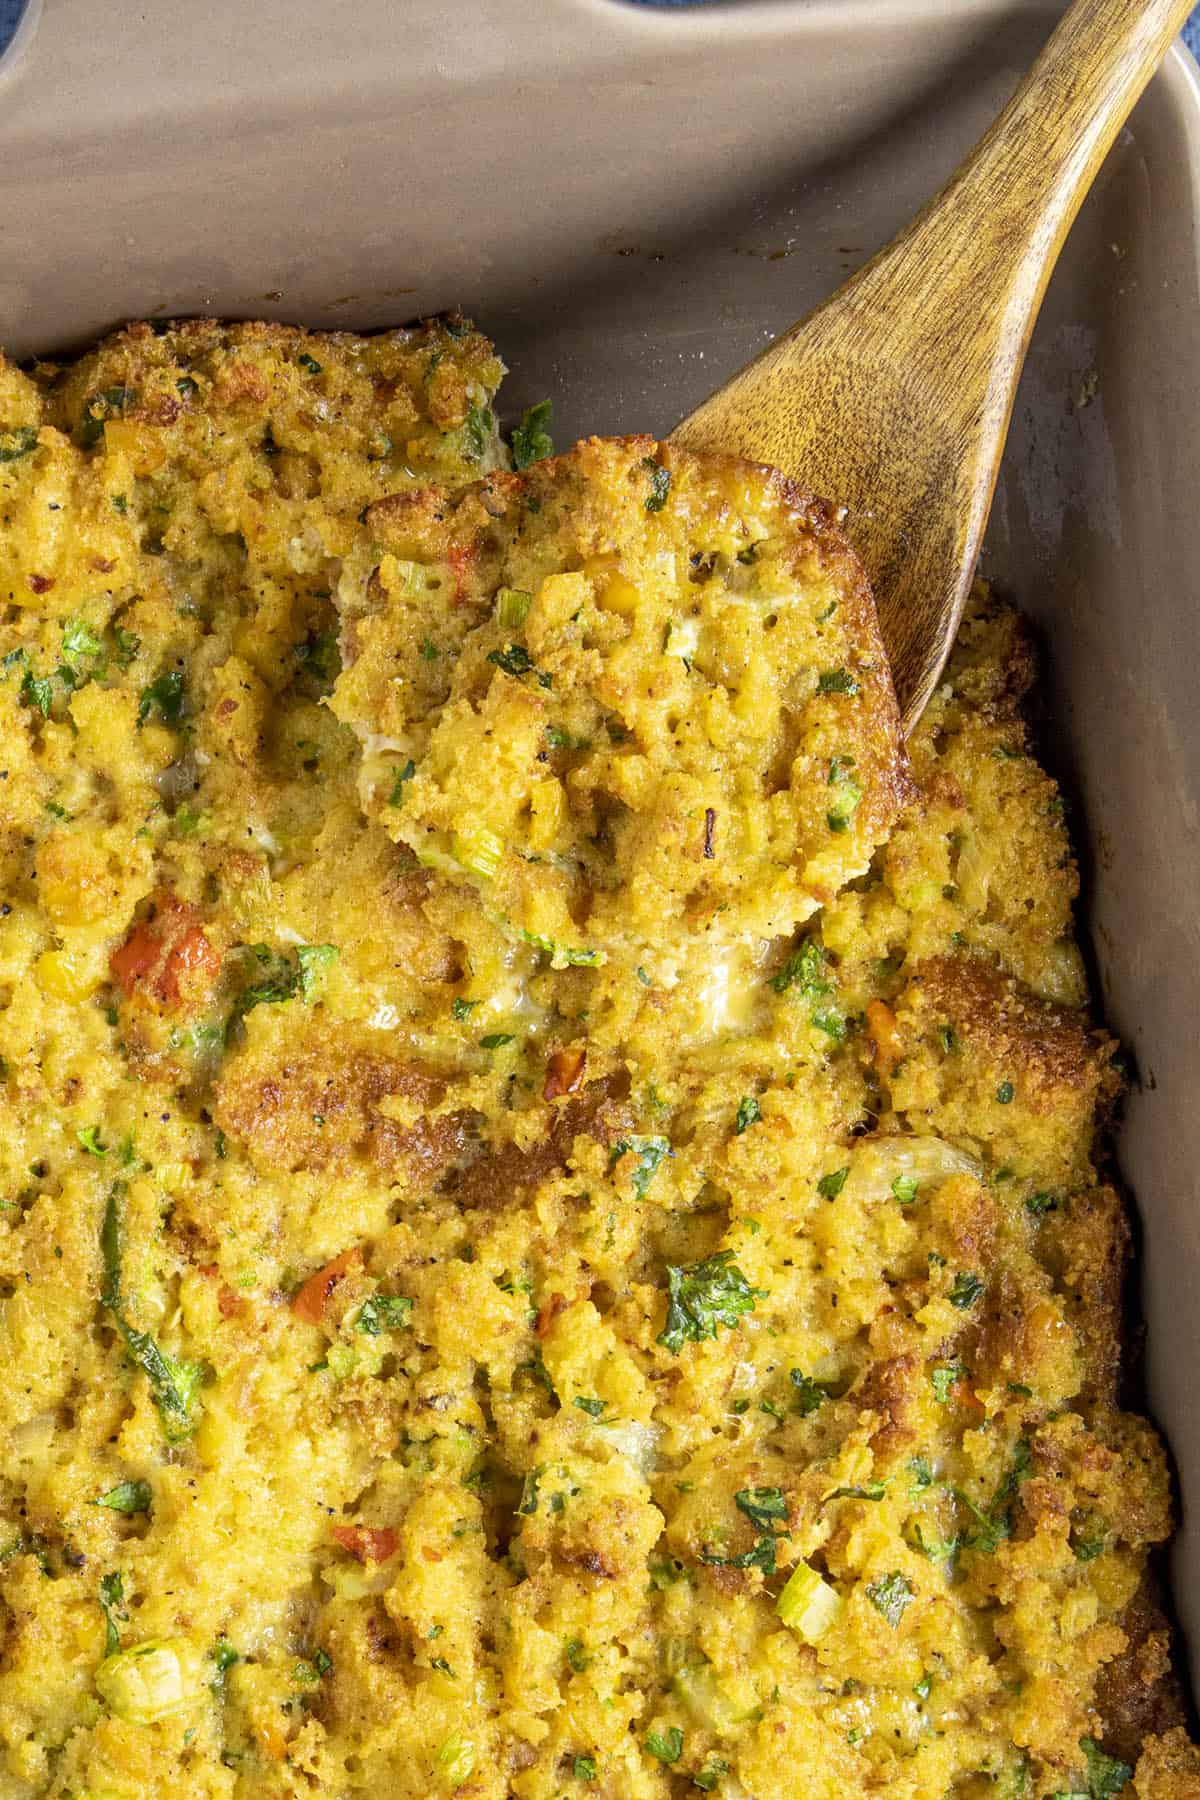 Cornbread Dressing being scooped from the casserole dish